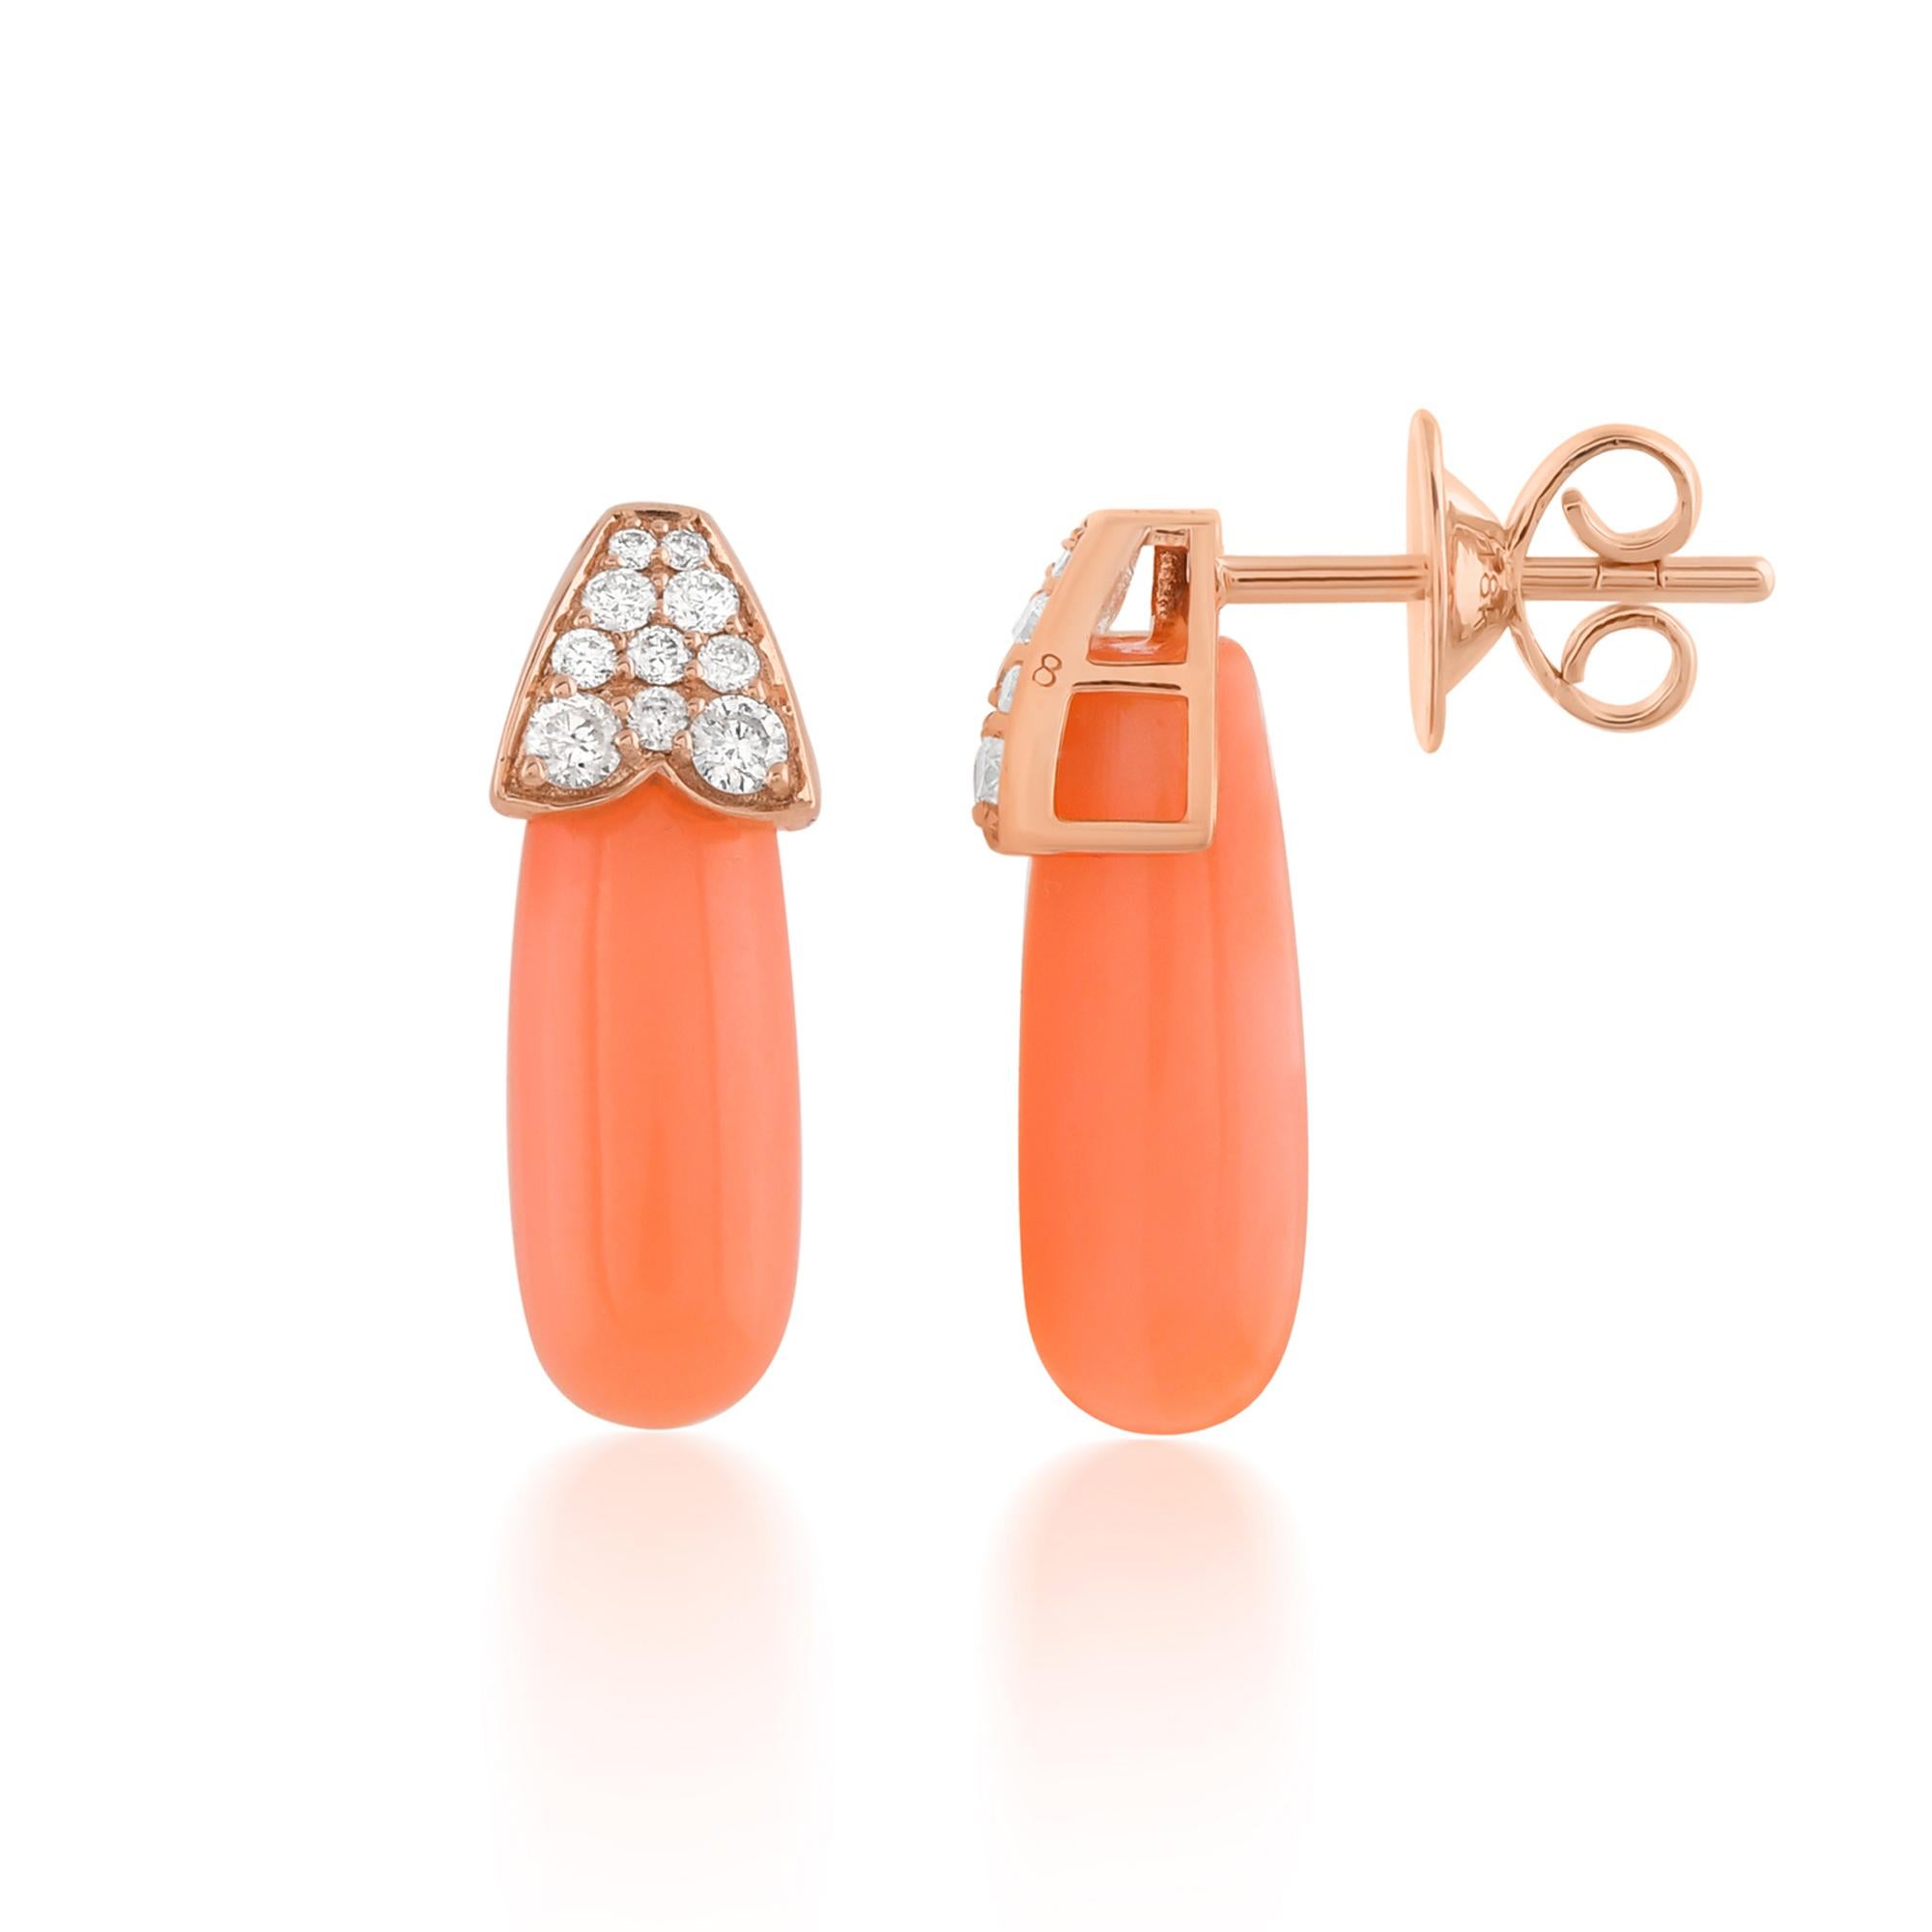 Item Code :- SEE-15628
Gross Wt. :- 4.30 gm
18k Rose Gold Wt. :- 2.35 gm
Natural Diamond Wt. :- 0.30 Ct. ( AVERAGE DIAMOND CLARITY SI1-SI2 & COLOR H-I )
Coral Wt. :- 9.45 Ct.
Earrings Size :- 16 mm approx.

✦ Sizing
.....................
We can